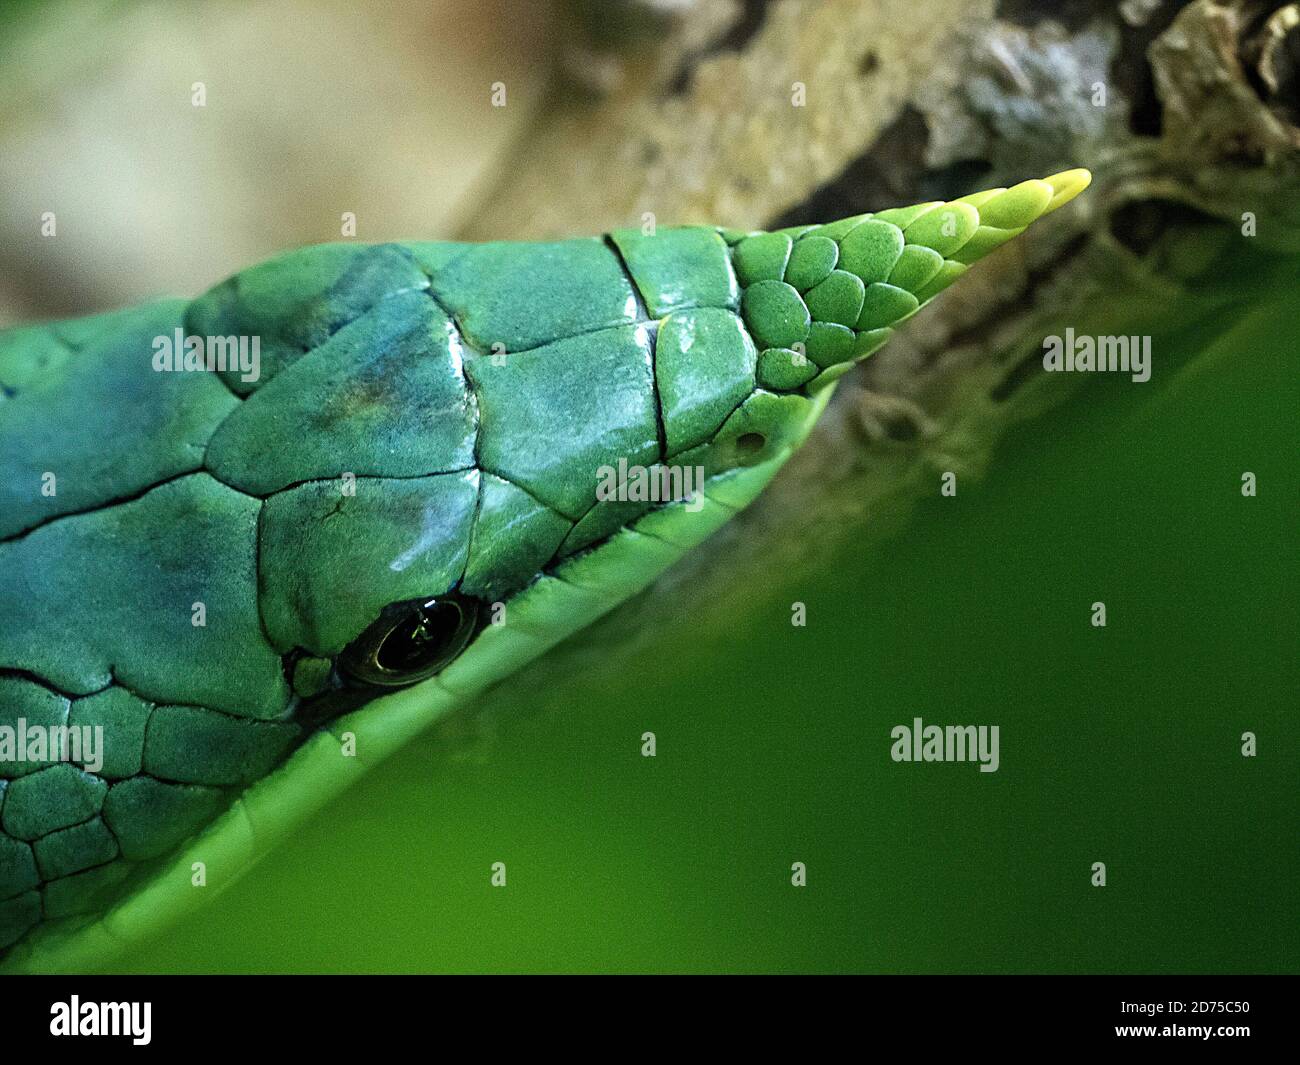 Funny snake close up with a long pointed nose Stock Photo